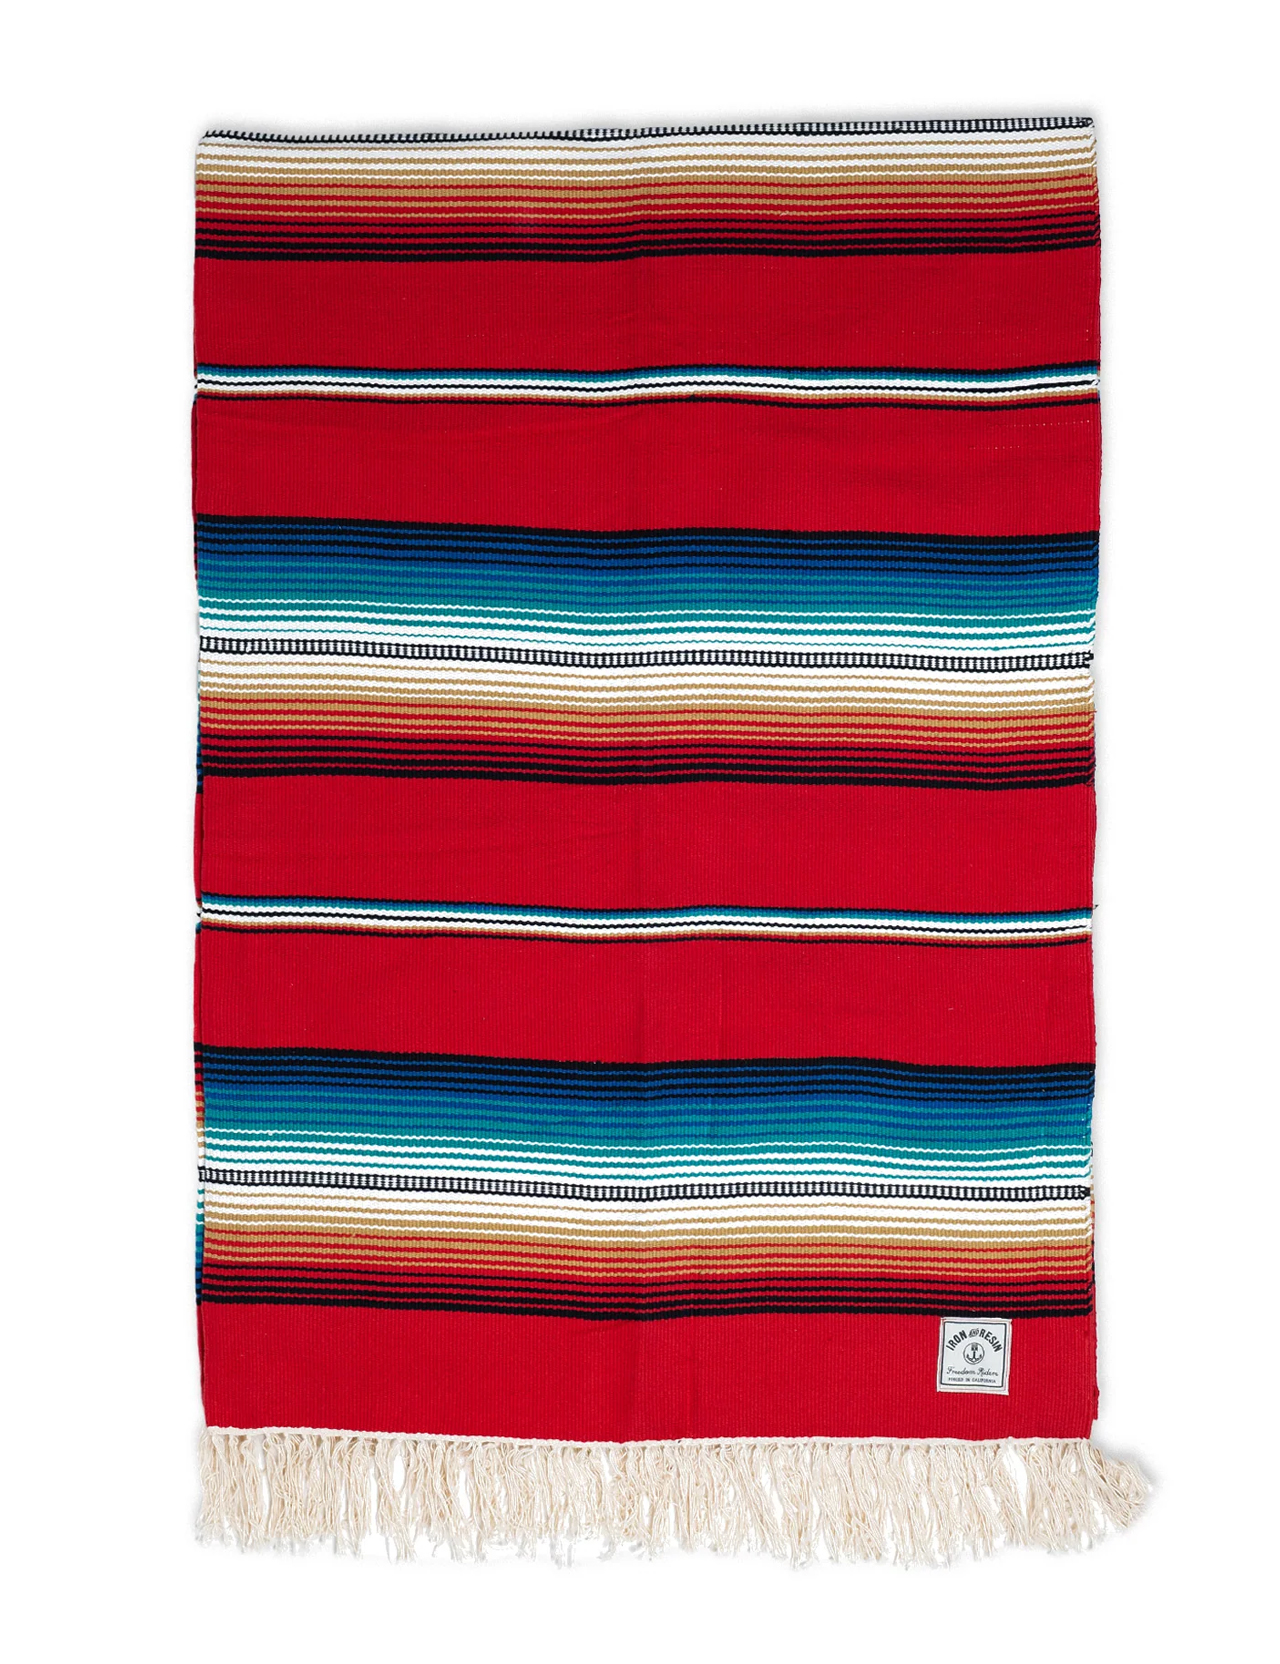 Iron & Resin - Del Sol Blanket - Red